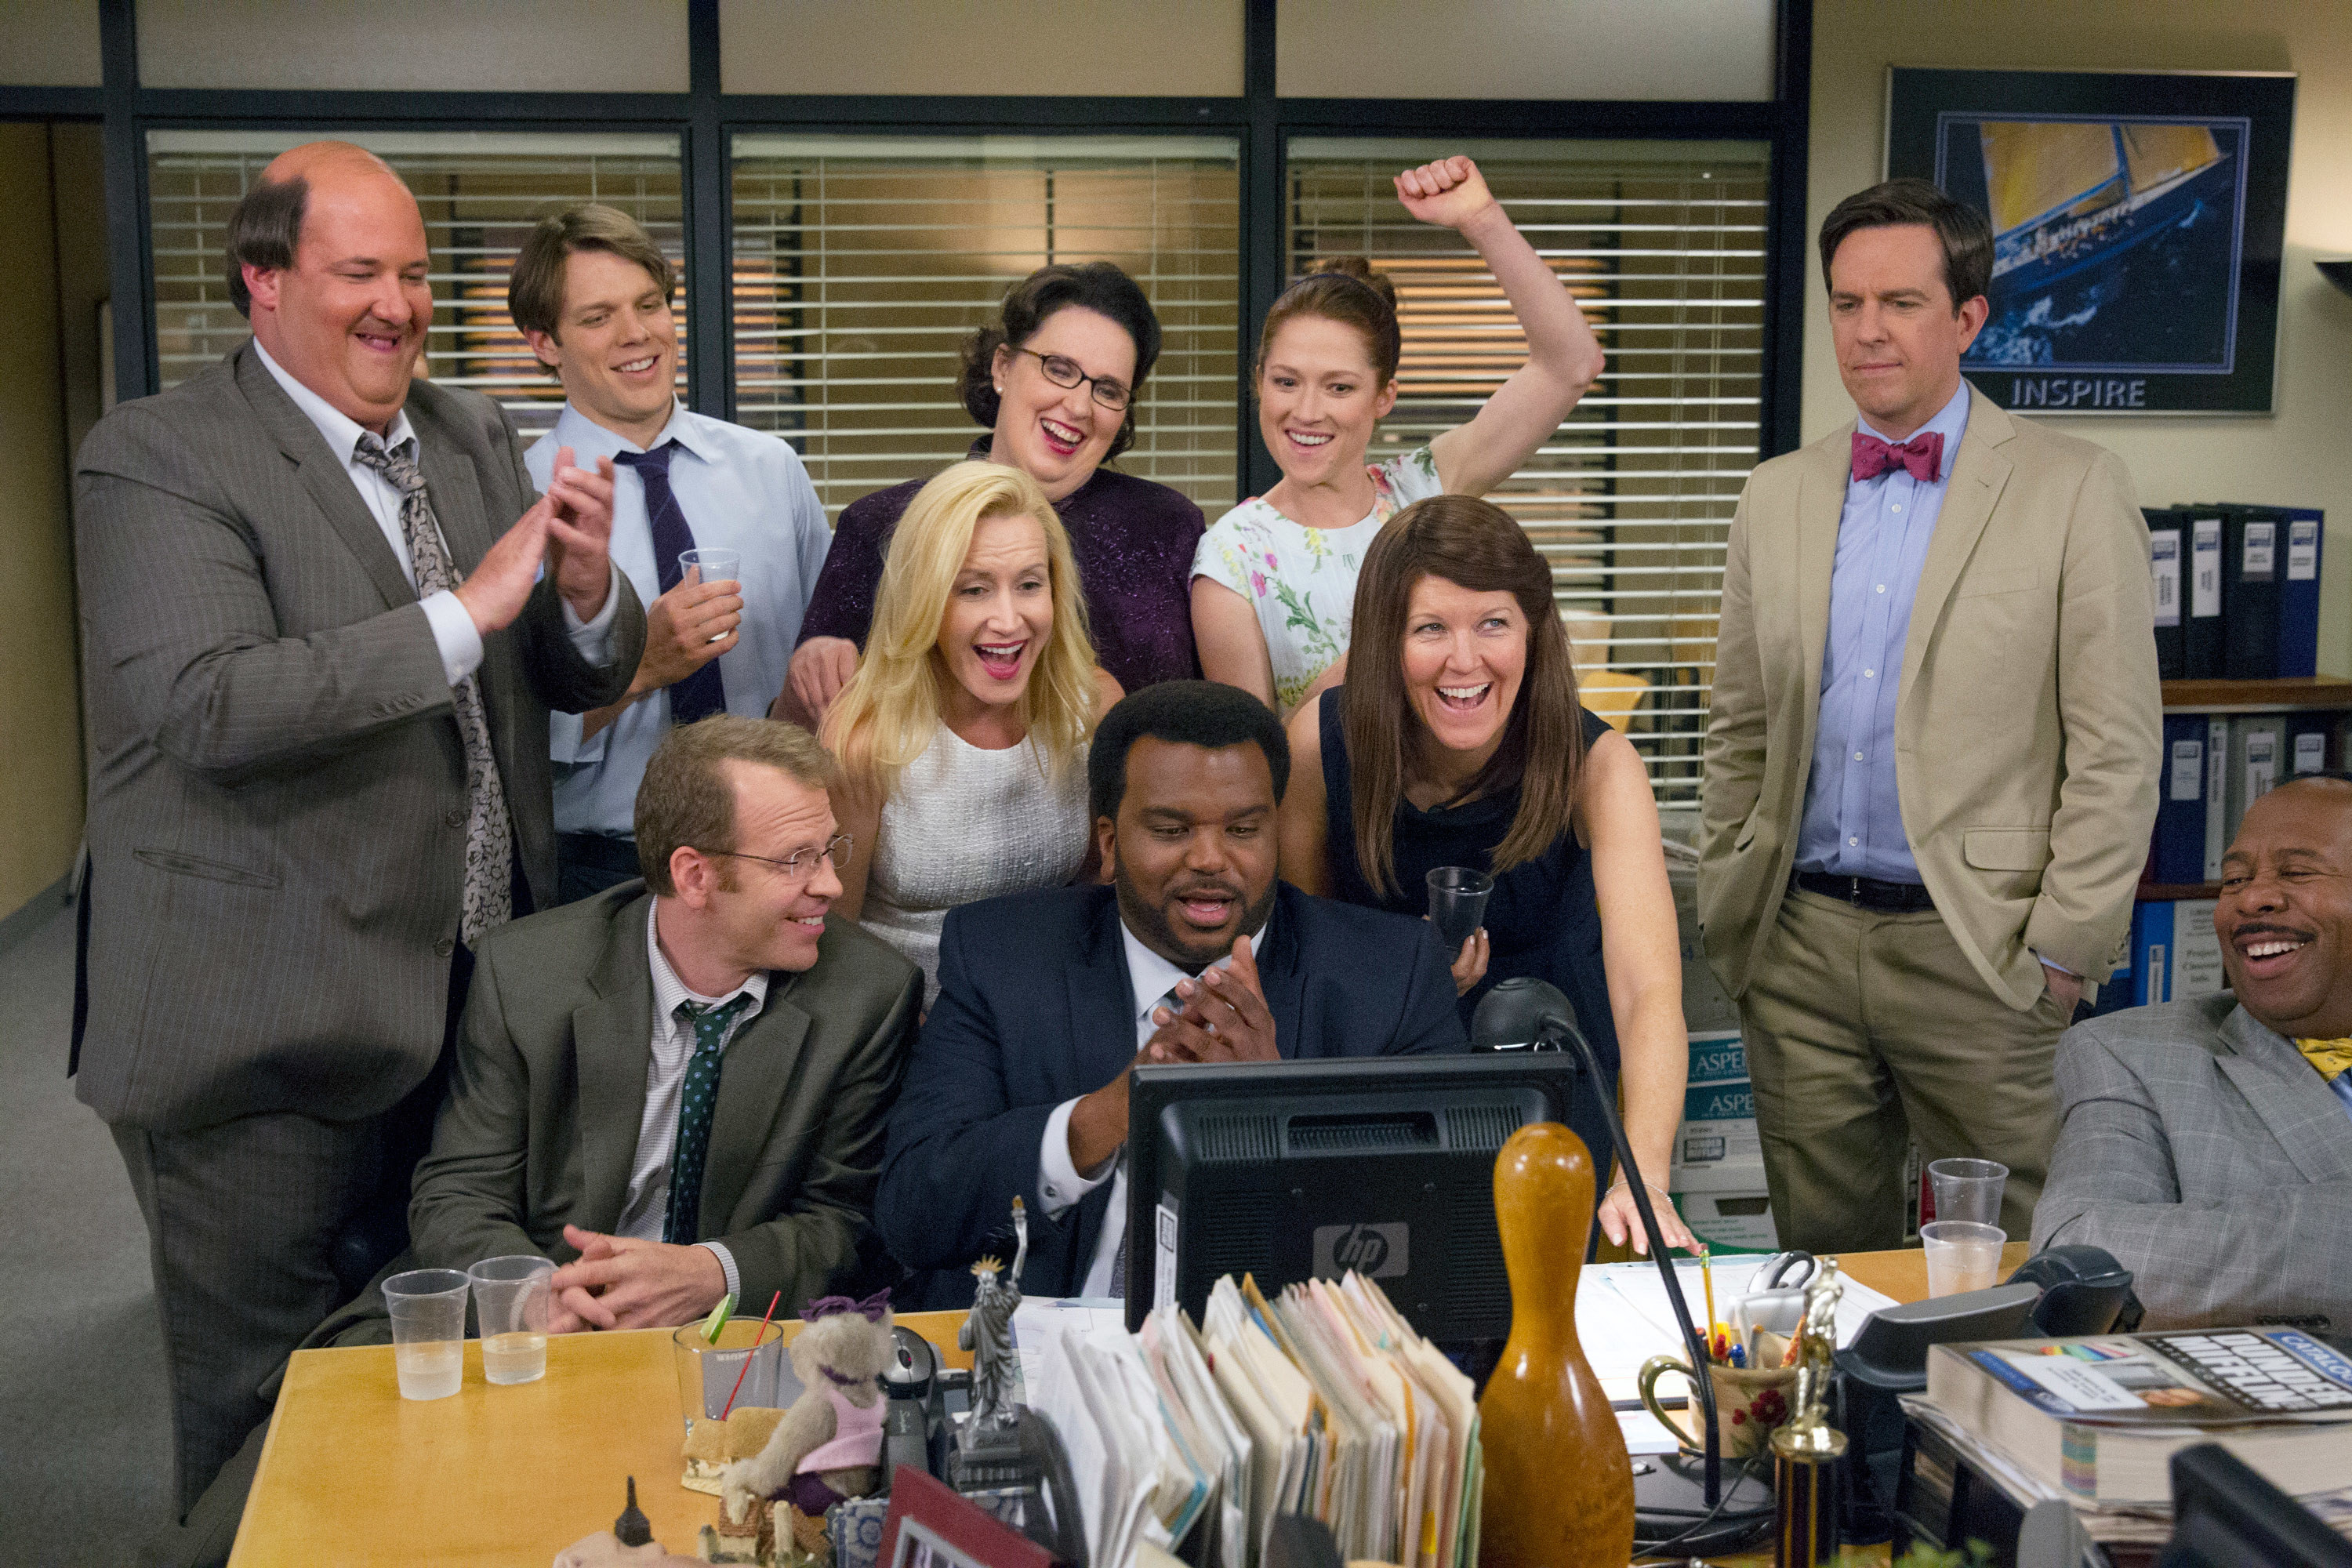 THE OFFICE, l-r: Brian Baumgartner, Jake Lacy, Paul Lieberstein, Angela Kinsey, Phyllis Smith, Craig Robinson, Ellie Kemper, Kate Flannery, Ed Helms, Leslie David Baker in &#x27;Finale&#x27; (Season 9, Episode 23, aired May 16, 2013), 2005-13